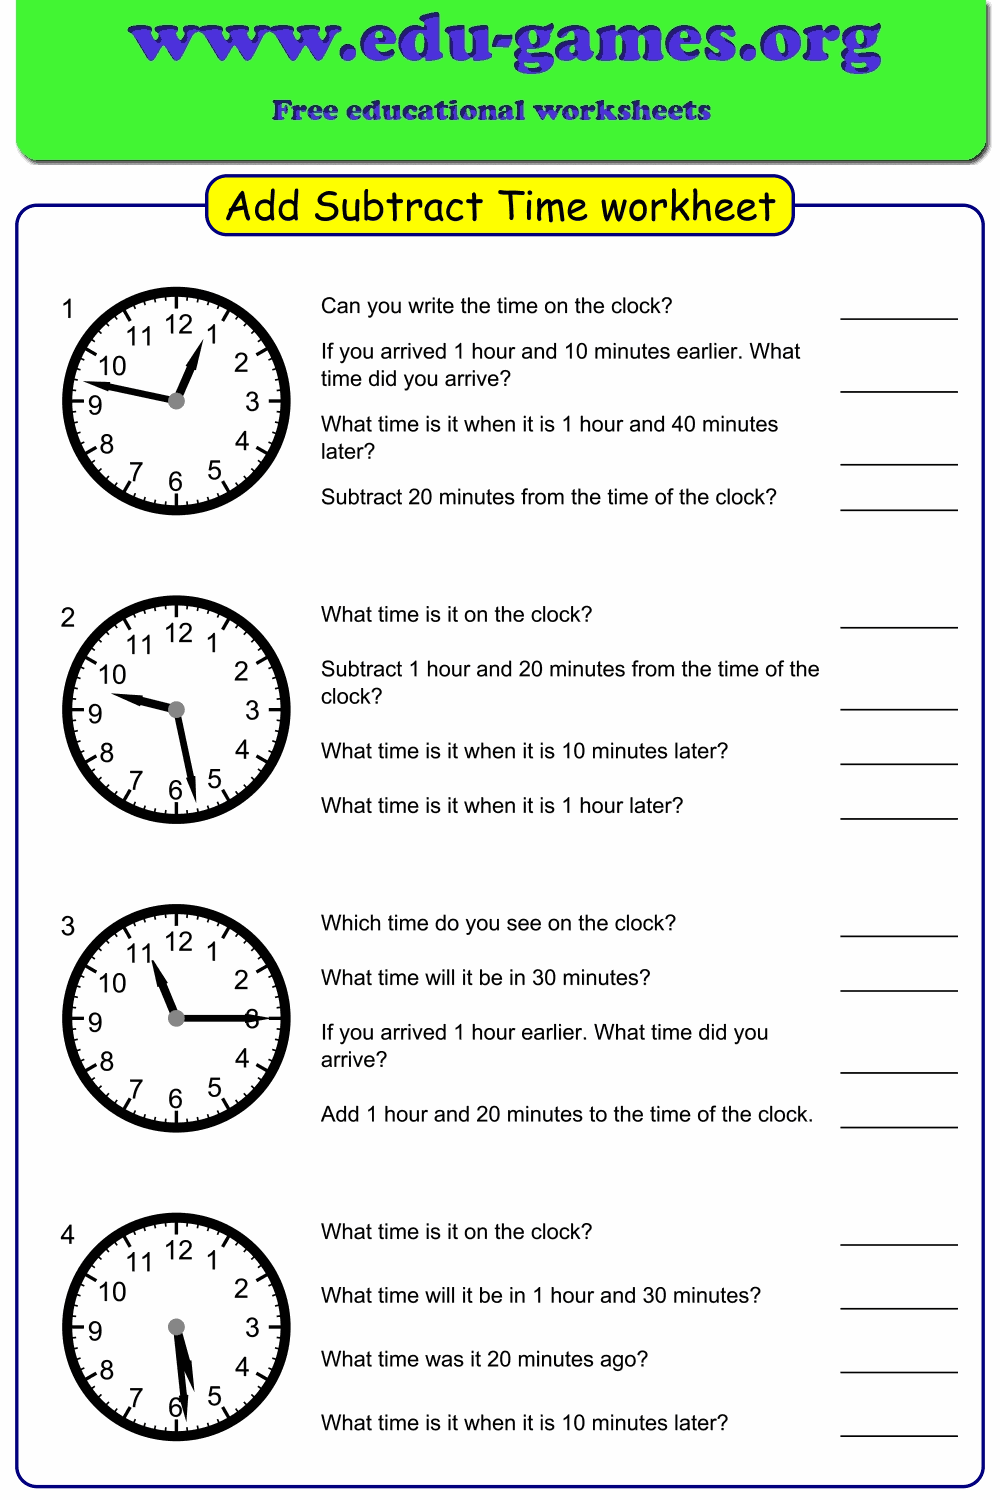 adding-subtracting-time-worksheets-free-download-goodimg-co